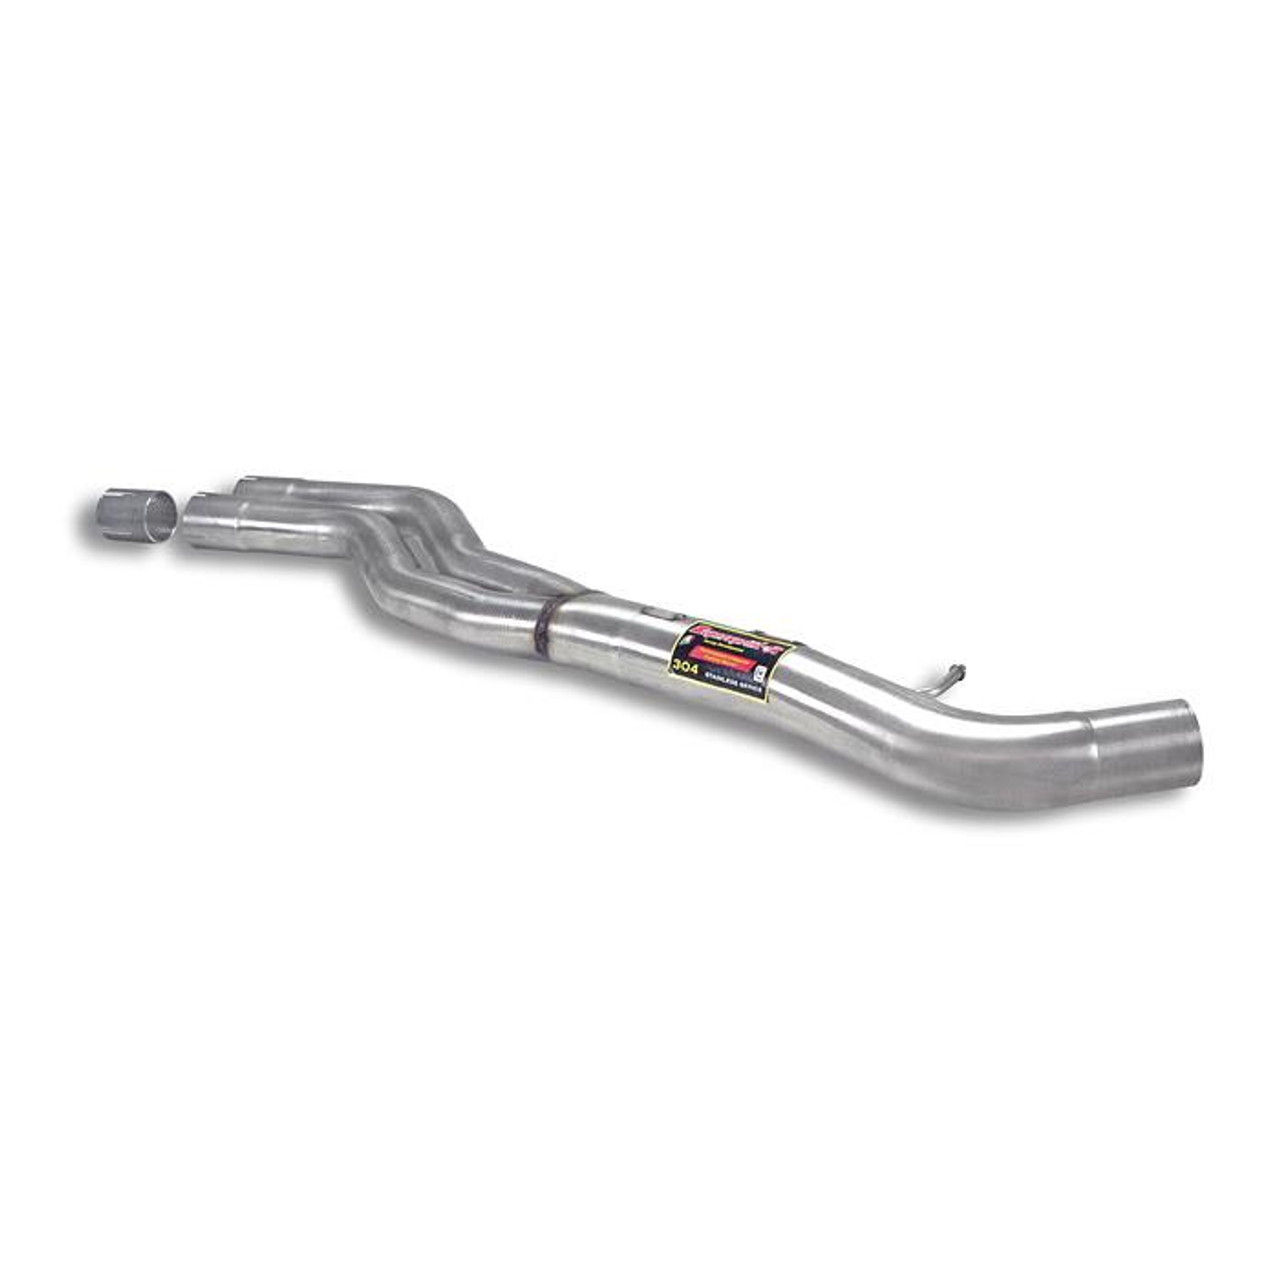 BMW Section 2 Straight Pipe Resonator Delete - Supersprint 789913